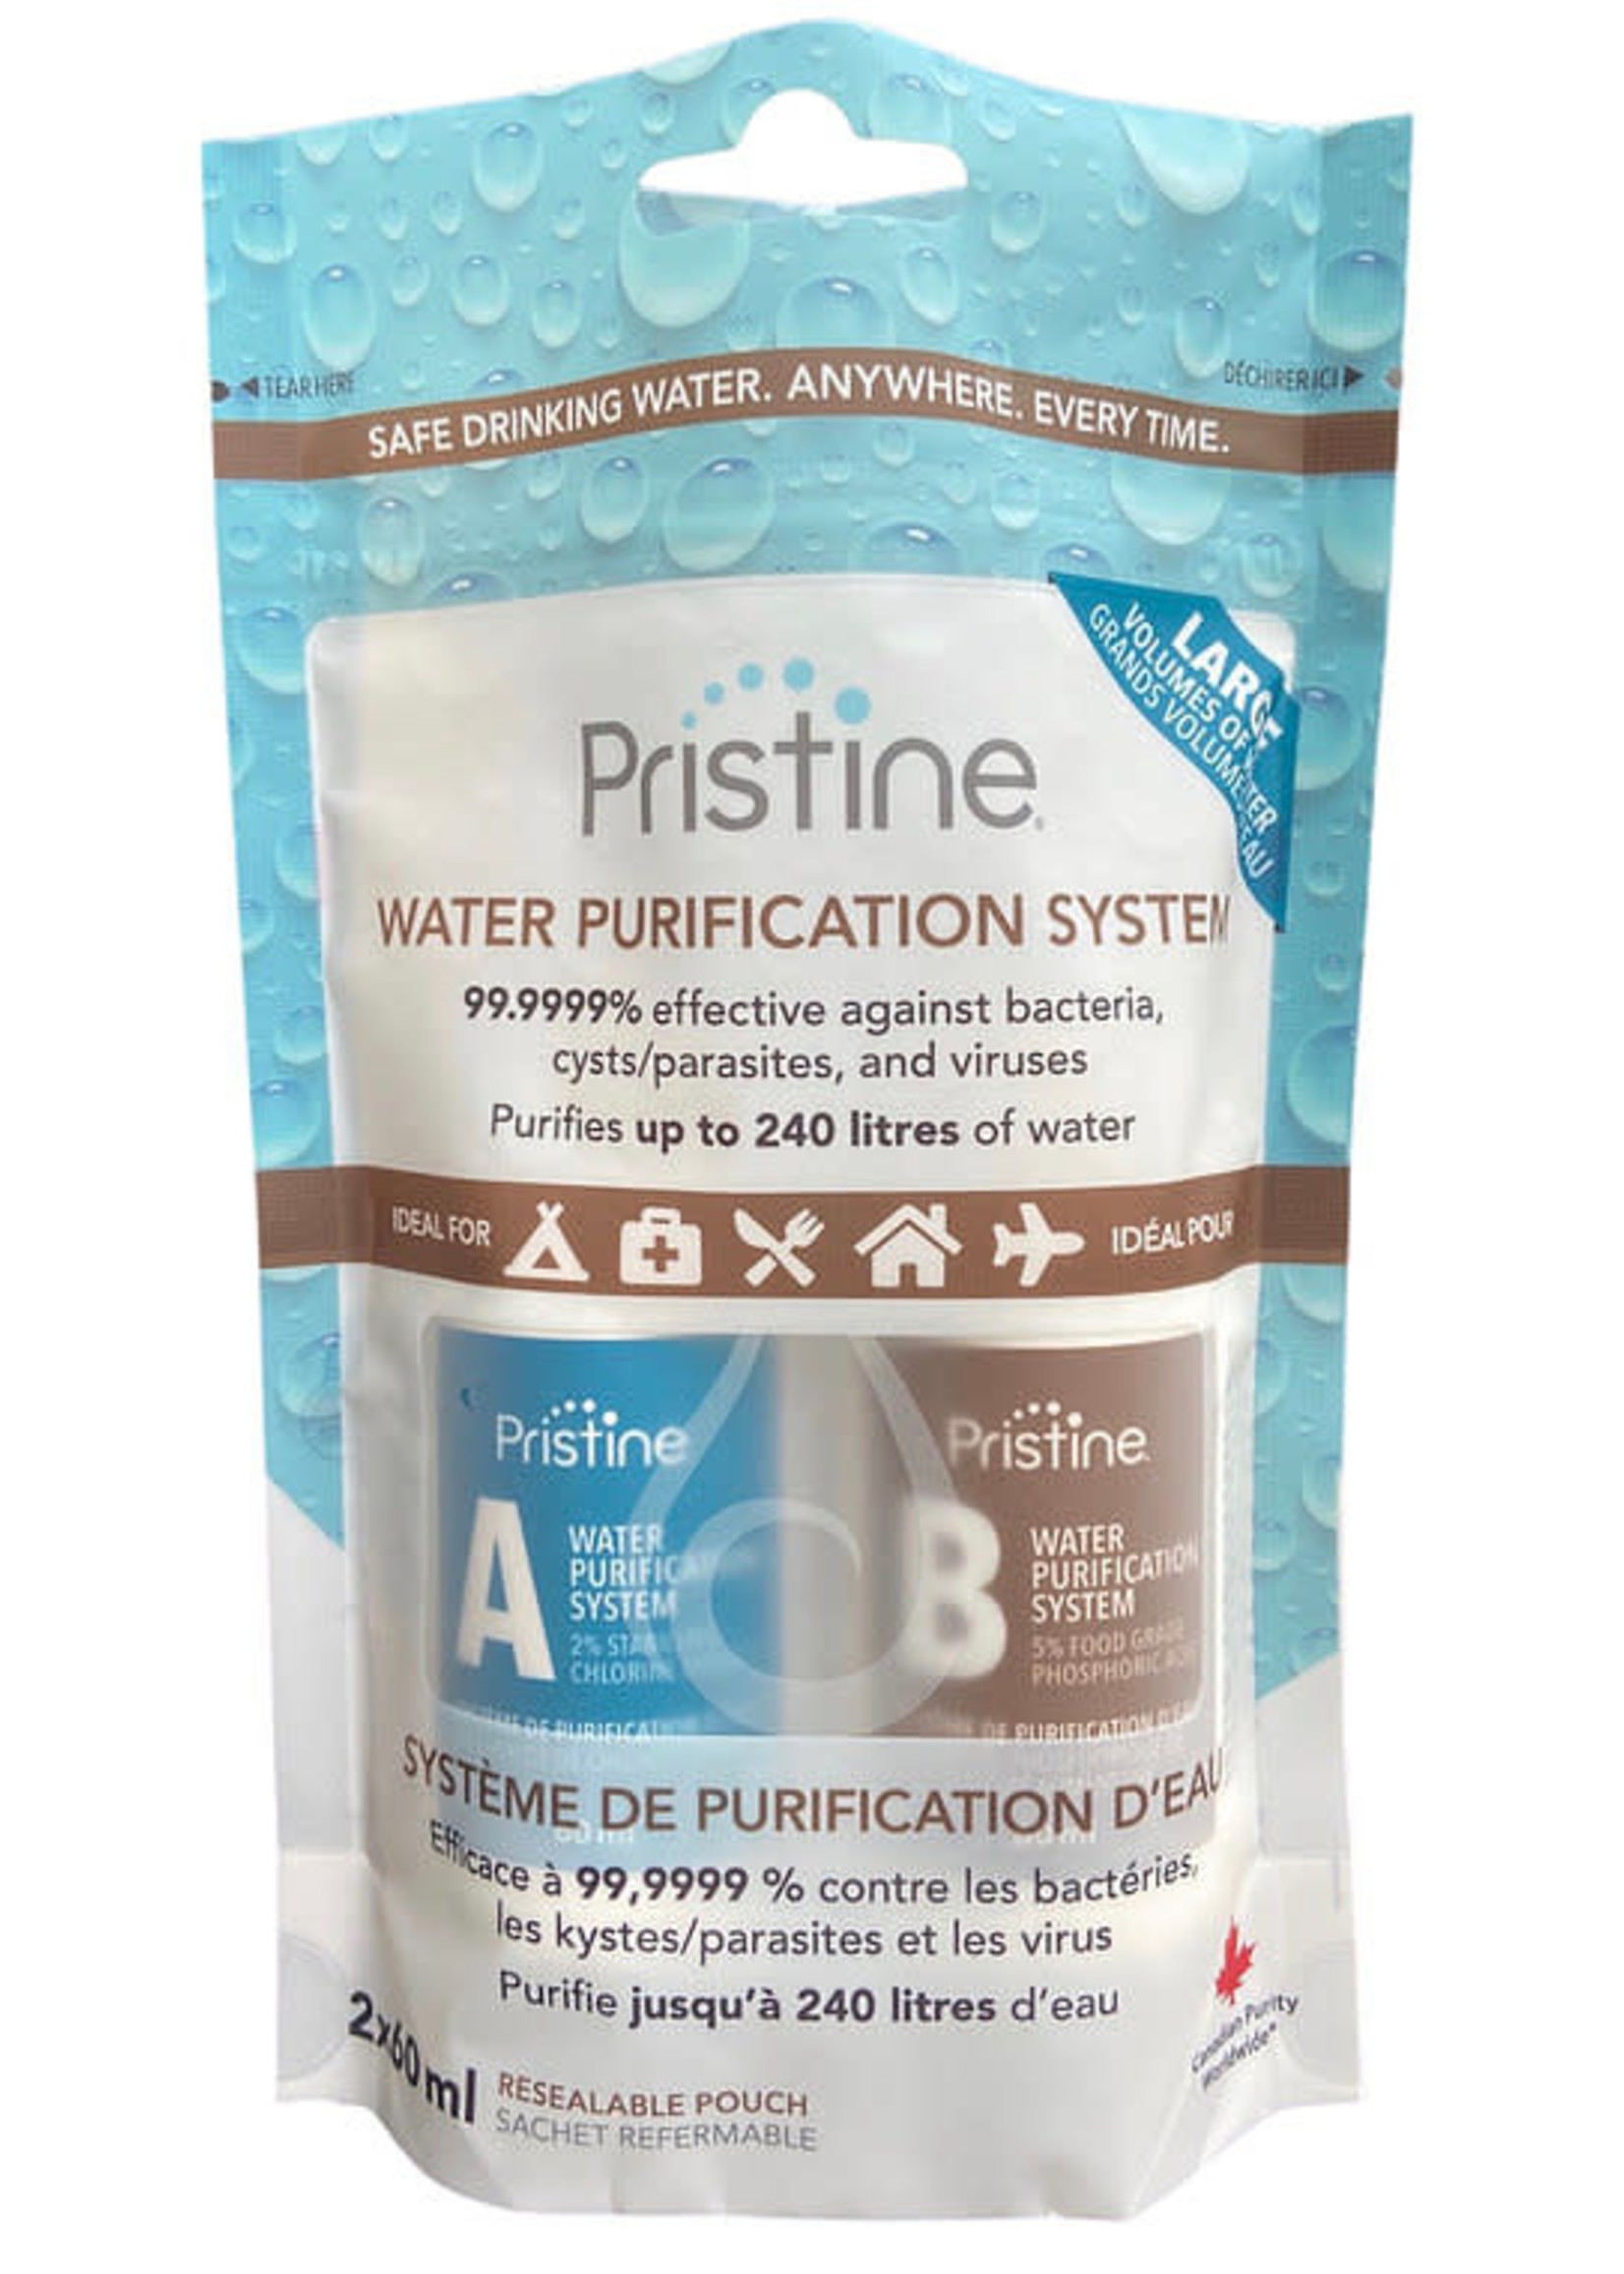 Pristine Water Purification System